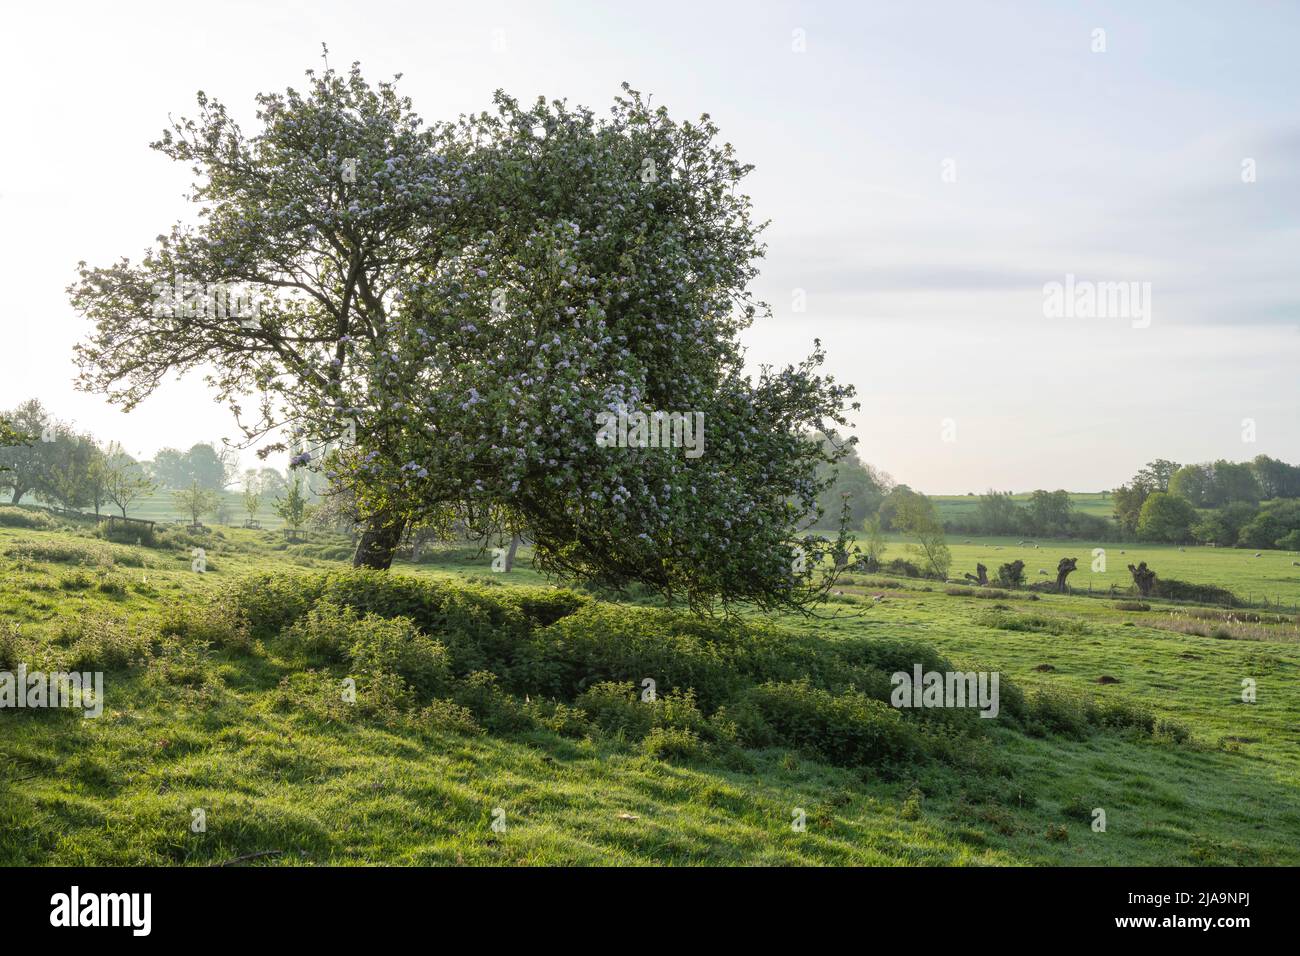 Apple tree in full blossom at the Coneygree, Chipping Campden, Cotswolds, England. Stock Photo